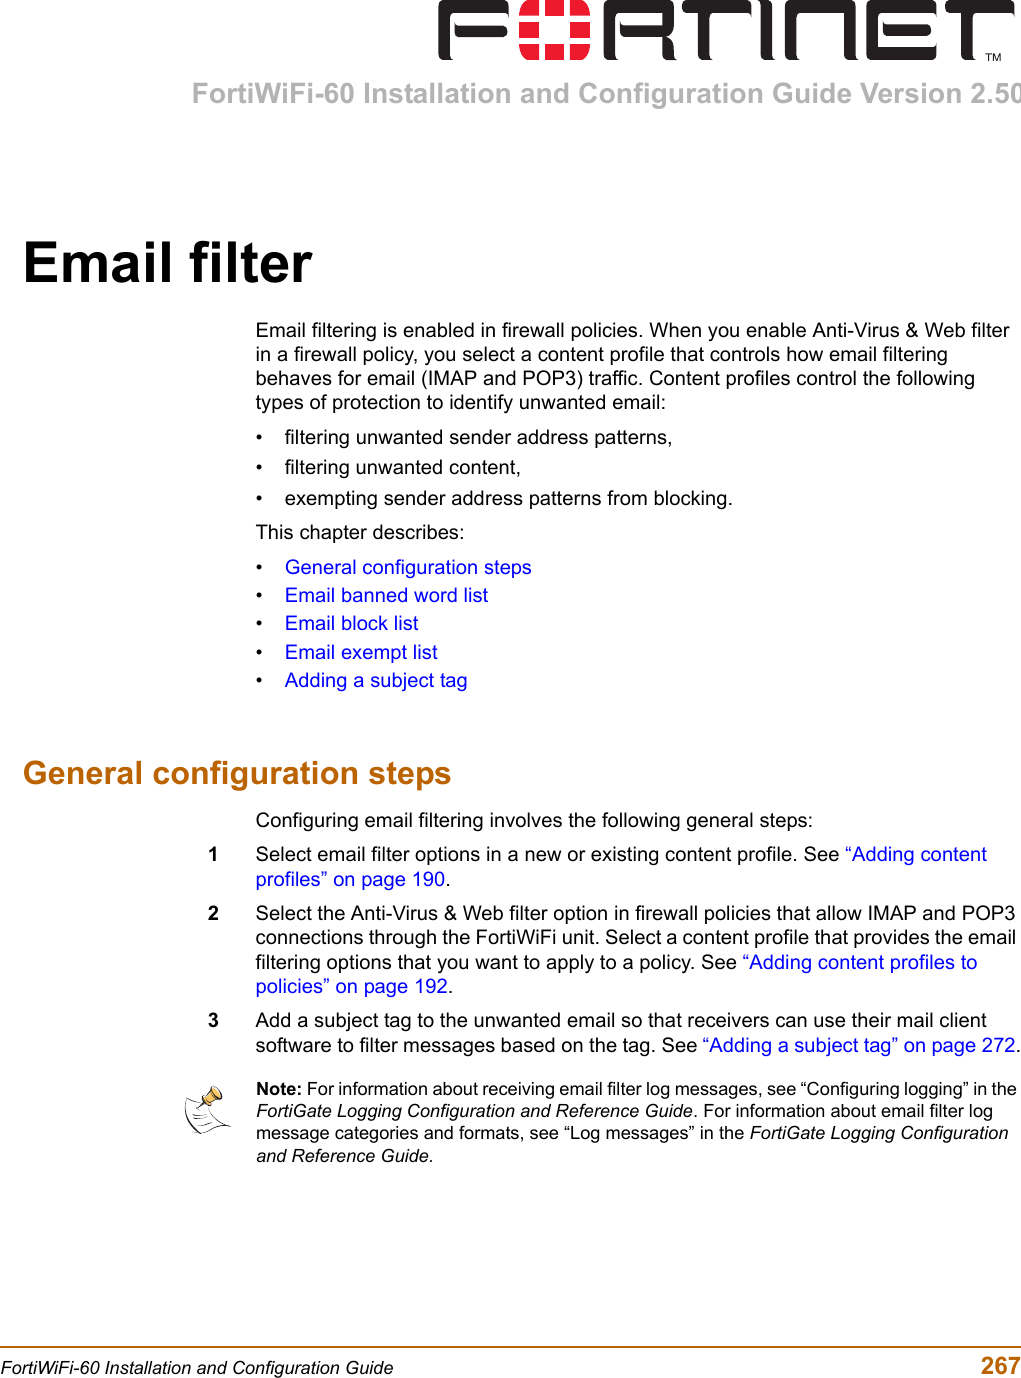 FortiWiFi-60 Installation and Configuration Guide Version 2.50FortiWiFi-60 Installation and Configuration Guide  267Email filterEmail filtering is enabled in firewall policies. When you enable Anti-Virus &amp; Web filter in a firewall policy, you select a content profile that controls how email filtering behaves for email (IMAP and POP3) traffic. Content profiles control the following types of protection to identify unwanted email:• filtering unwanted sender address patterns,• filtering unwanted content,• exempting sender address patterns from blocking.This chapter describes:•General configuration steps•Email banned word list•Email block list•Email exempt list•Adding a subject tagGeneral configuration stepsConfiguring email filtering involves the following general steps:1Select email filter options in a new or existing content profile. See “Adding content profiles” on page 190.2Select the Anti-Virus &amp; Web filter option in firewall policies that allow IMAP and POP3 connections through the FortiWiFi unit. Select a content profile that provides the email filtering options that you want to apply to a policy. See “Adding content profiles to policies” on page 192.3Add a subject tag to the unwanted email so that receivers can use their mail client software to filter messages based on the tag. See “Adding a subject tag” on page 272.Note: For information about receiving email filter log messages, see “Configuring logging” in the FortiGate Logging Configuration and Reference Guide. For information about email filter log message categories and formats, see “Log messages” in the FortiGate Logging Configuration and Reference Guide.